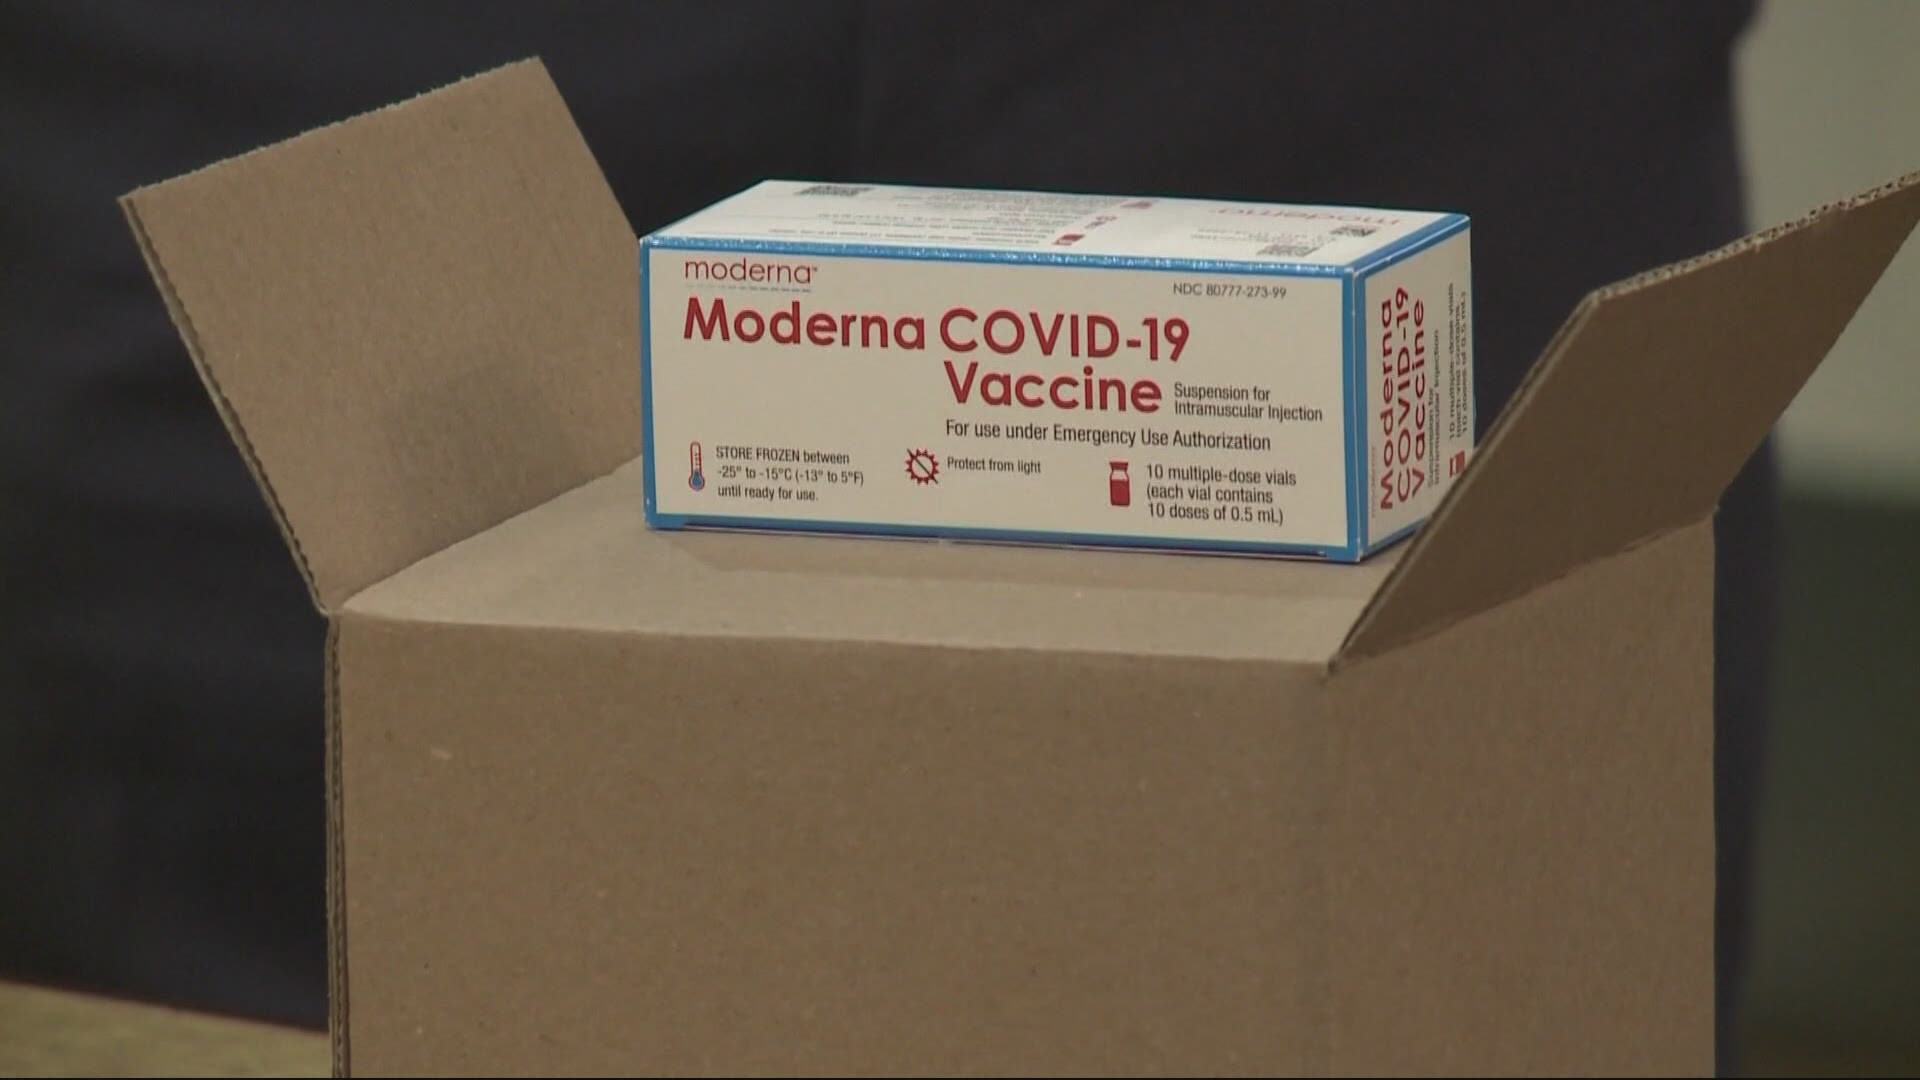 Portland researchers are conducting what's believed to be the first study into how the COVID-19 vaccine impacts pregnant or breastfeeding mother.